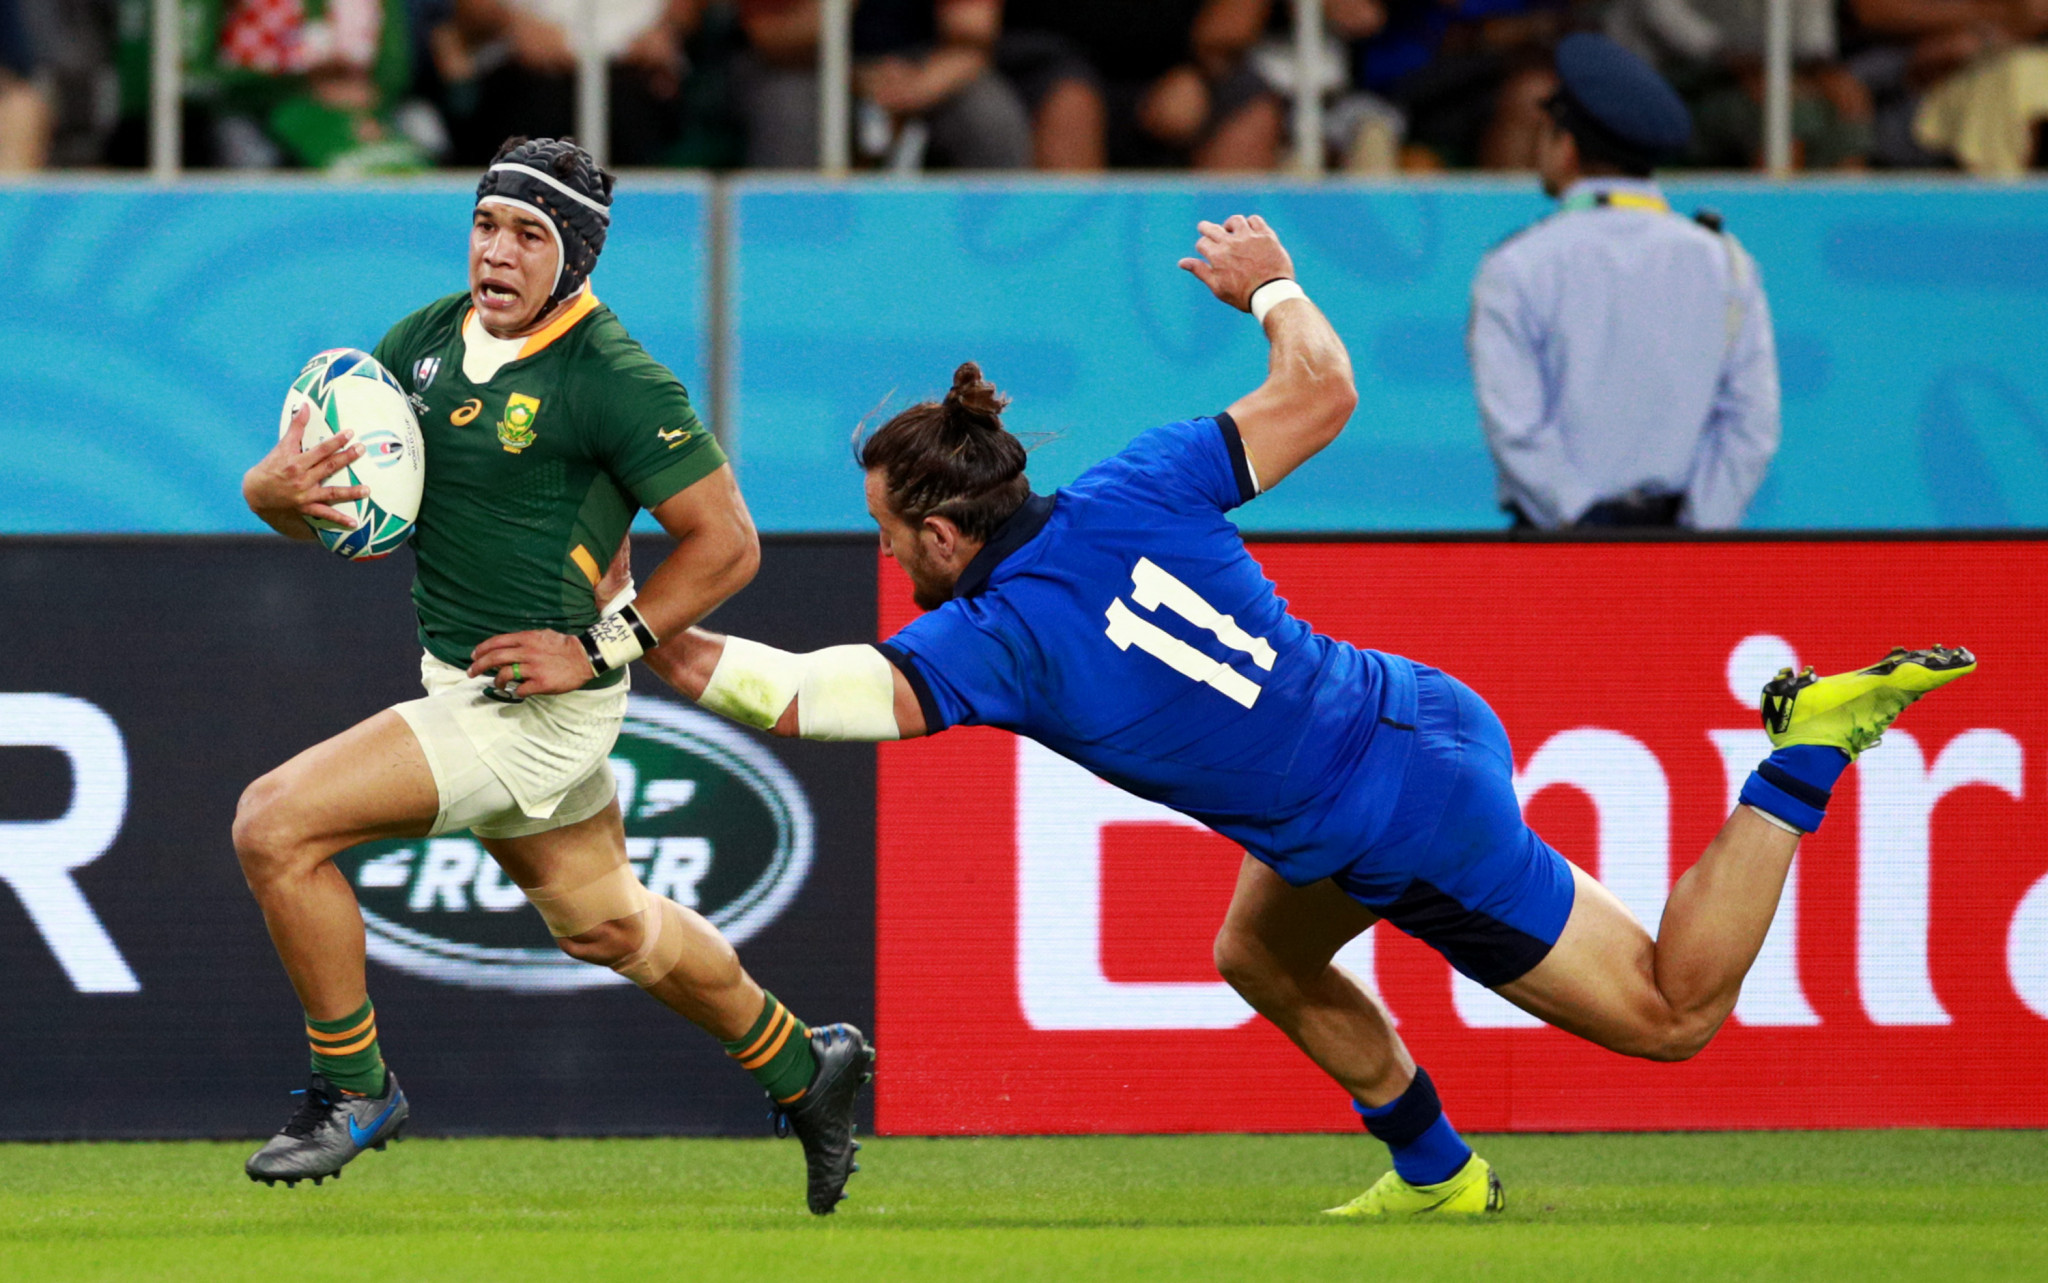 Perfectly balanced and elusive, Cheslin Kolbe scored the opening try for South Africa ©Getty Images